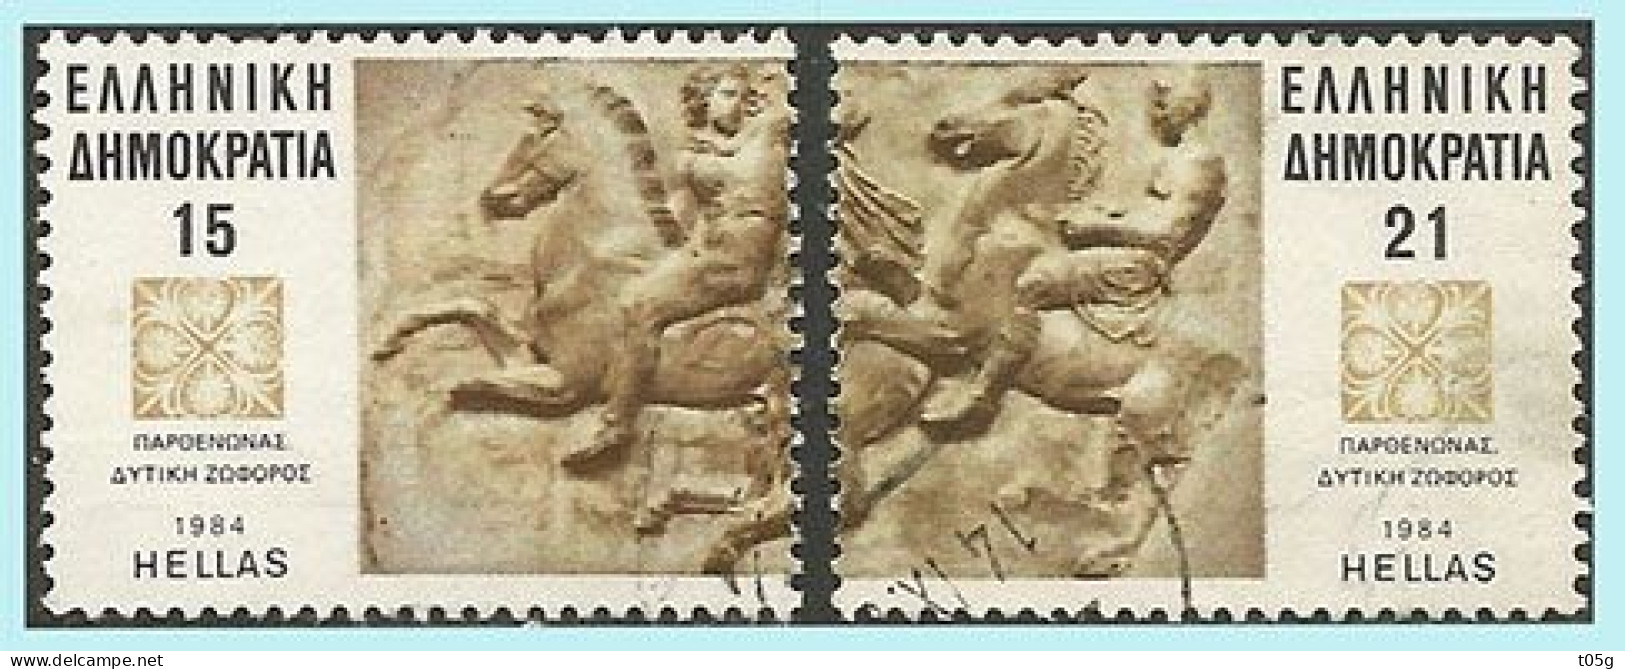 GREECE- GRECE- HELLAS 1984: 15+21drx  Marbles Of The Parhenon From  Miniature Sheet Used - Oblitérés